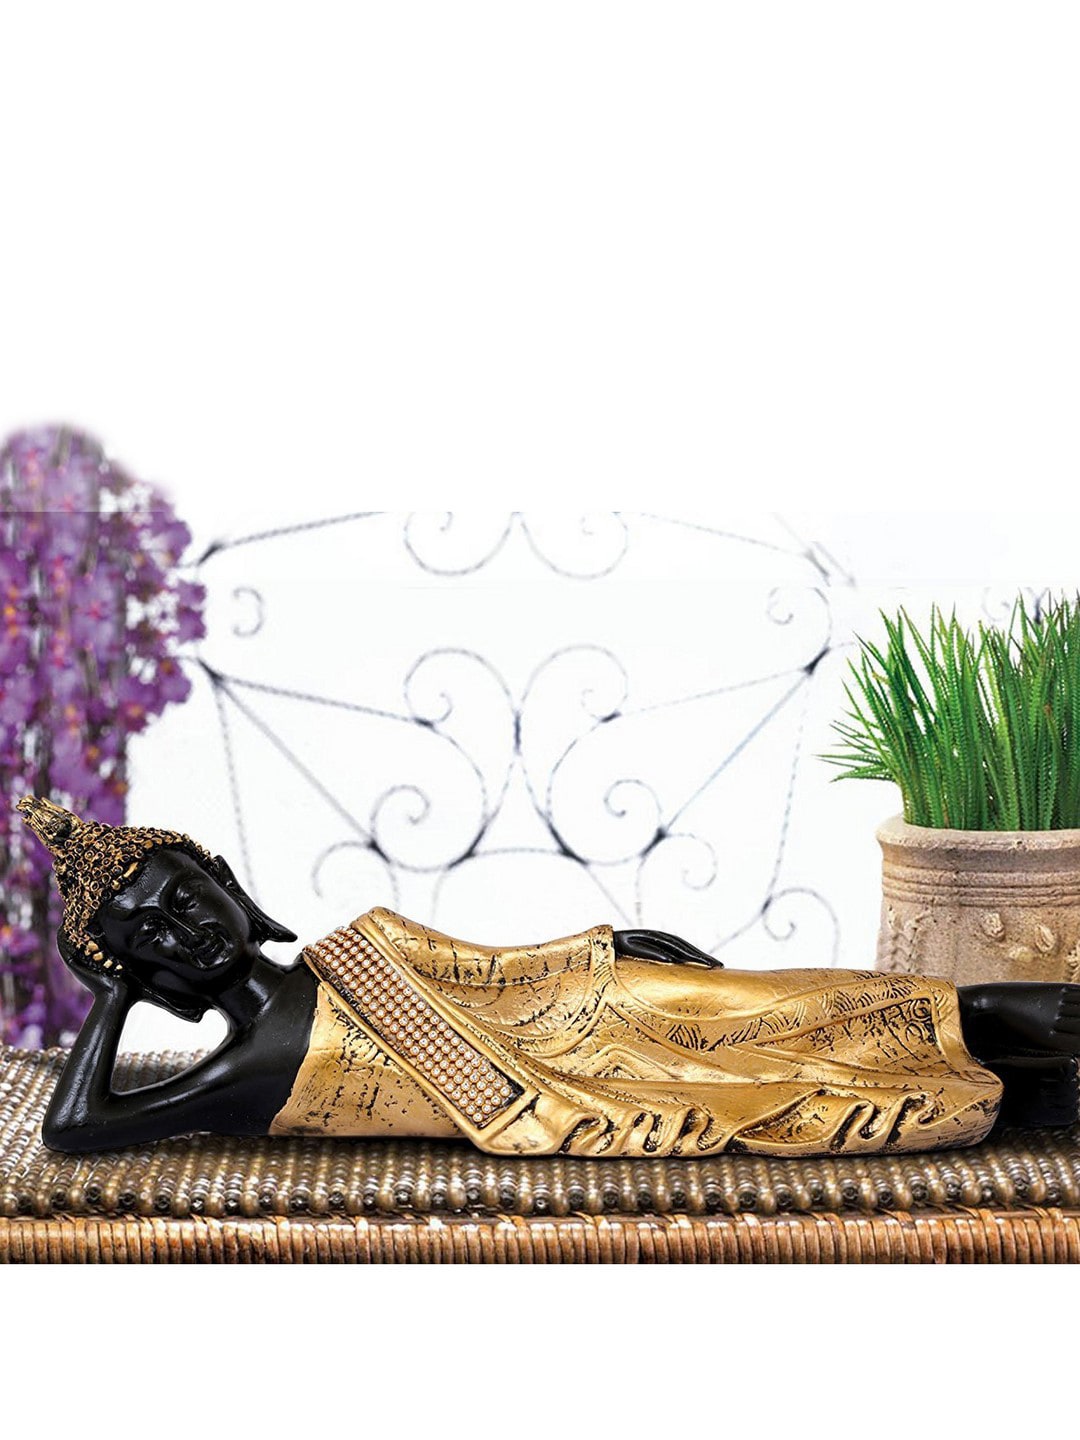 eCraftIndia Gold-Toned & Black Handcrafted Decorative Reclining Lord Buddha Idol Price in India